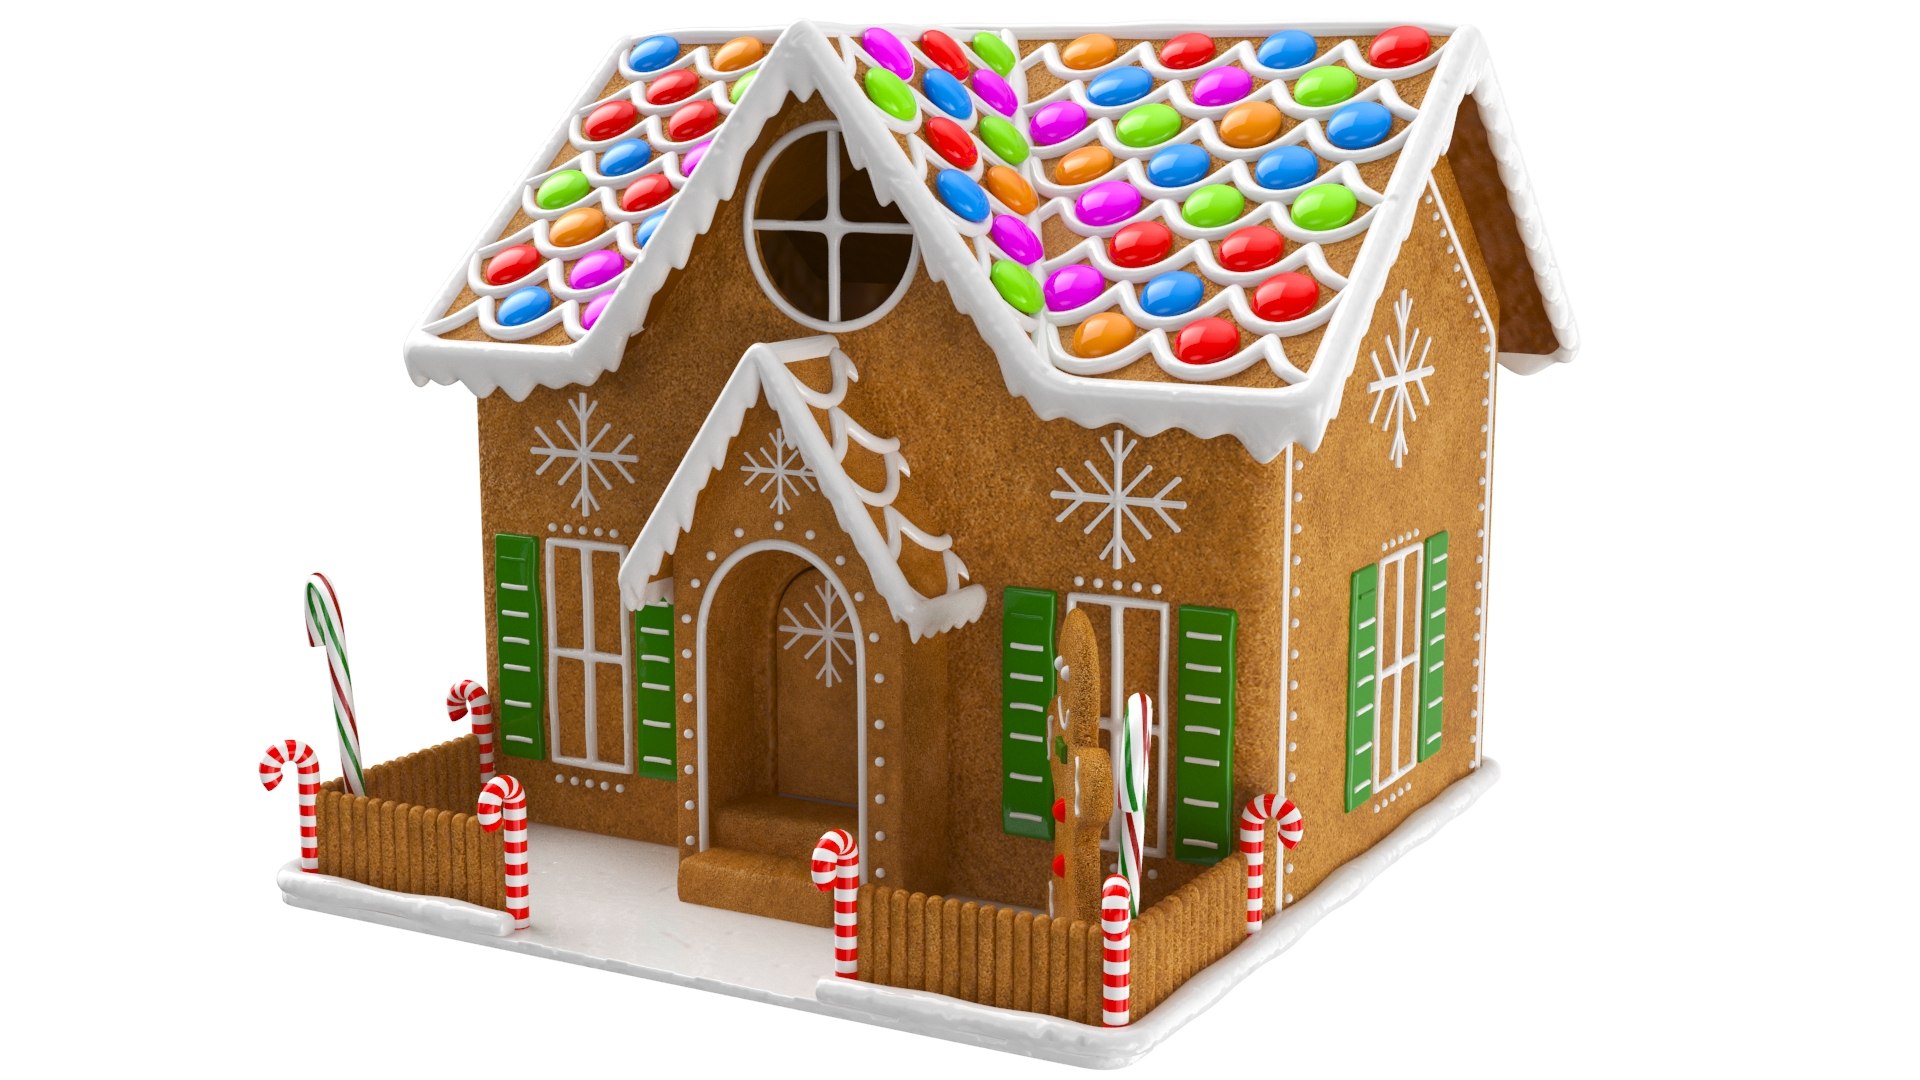 3D Real Ginger Bread House - TurboSquid 1664446